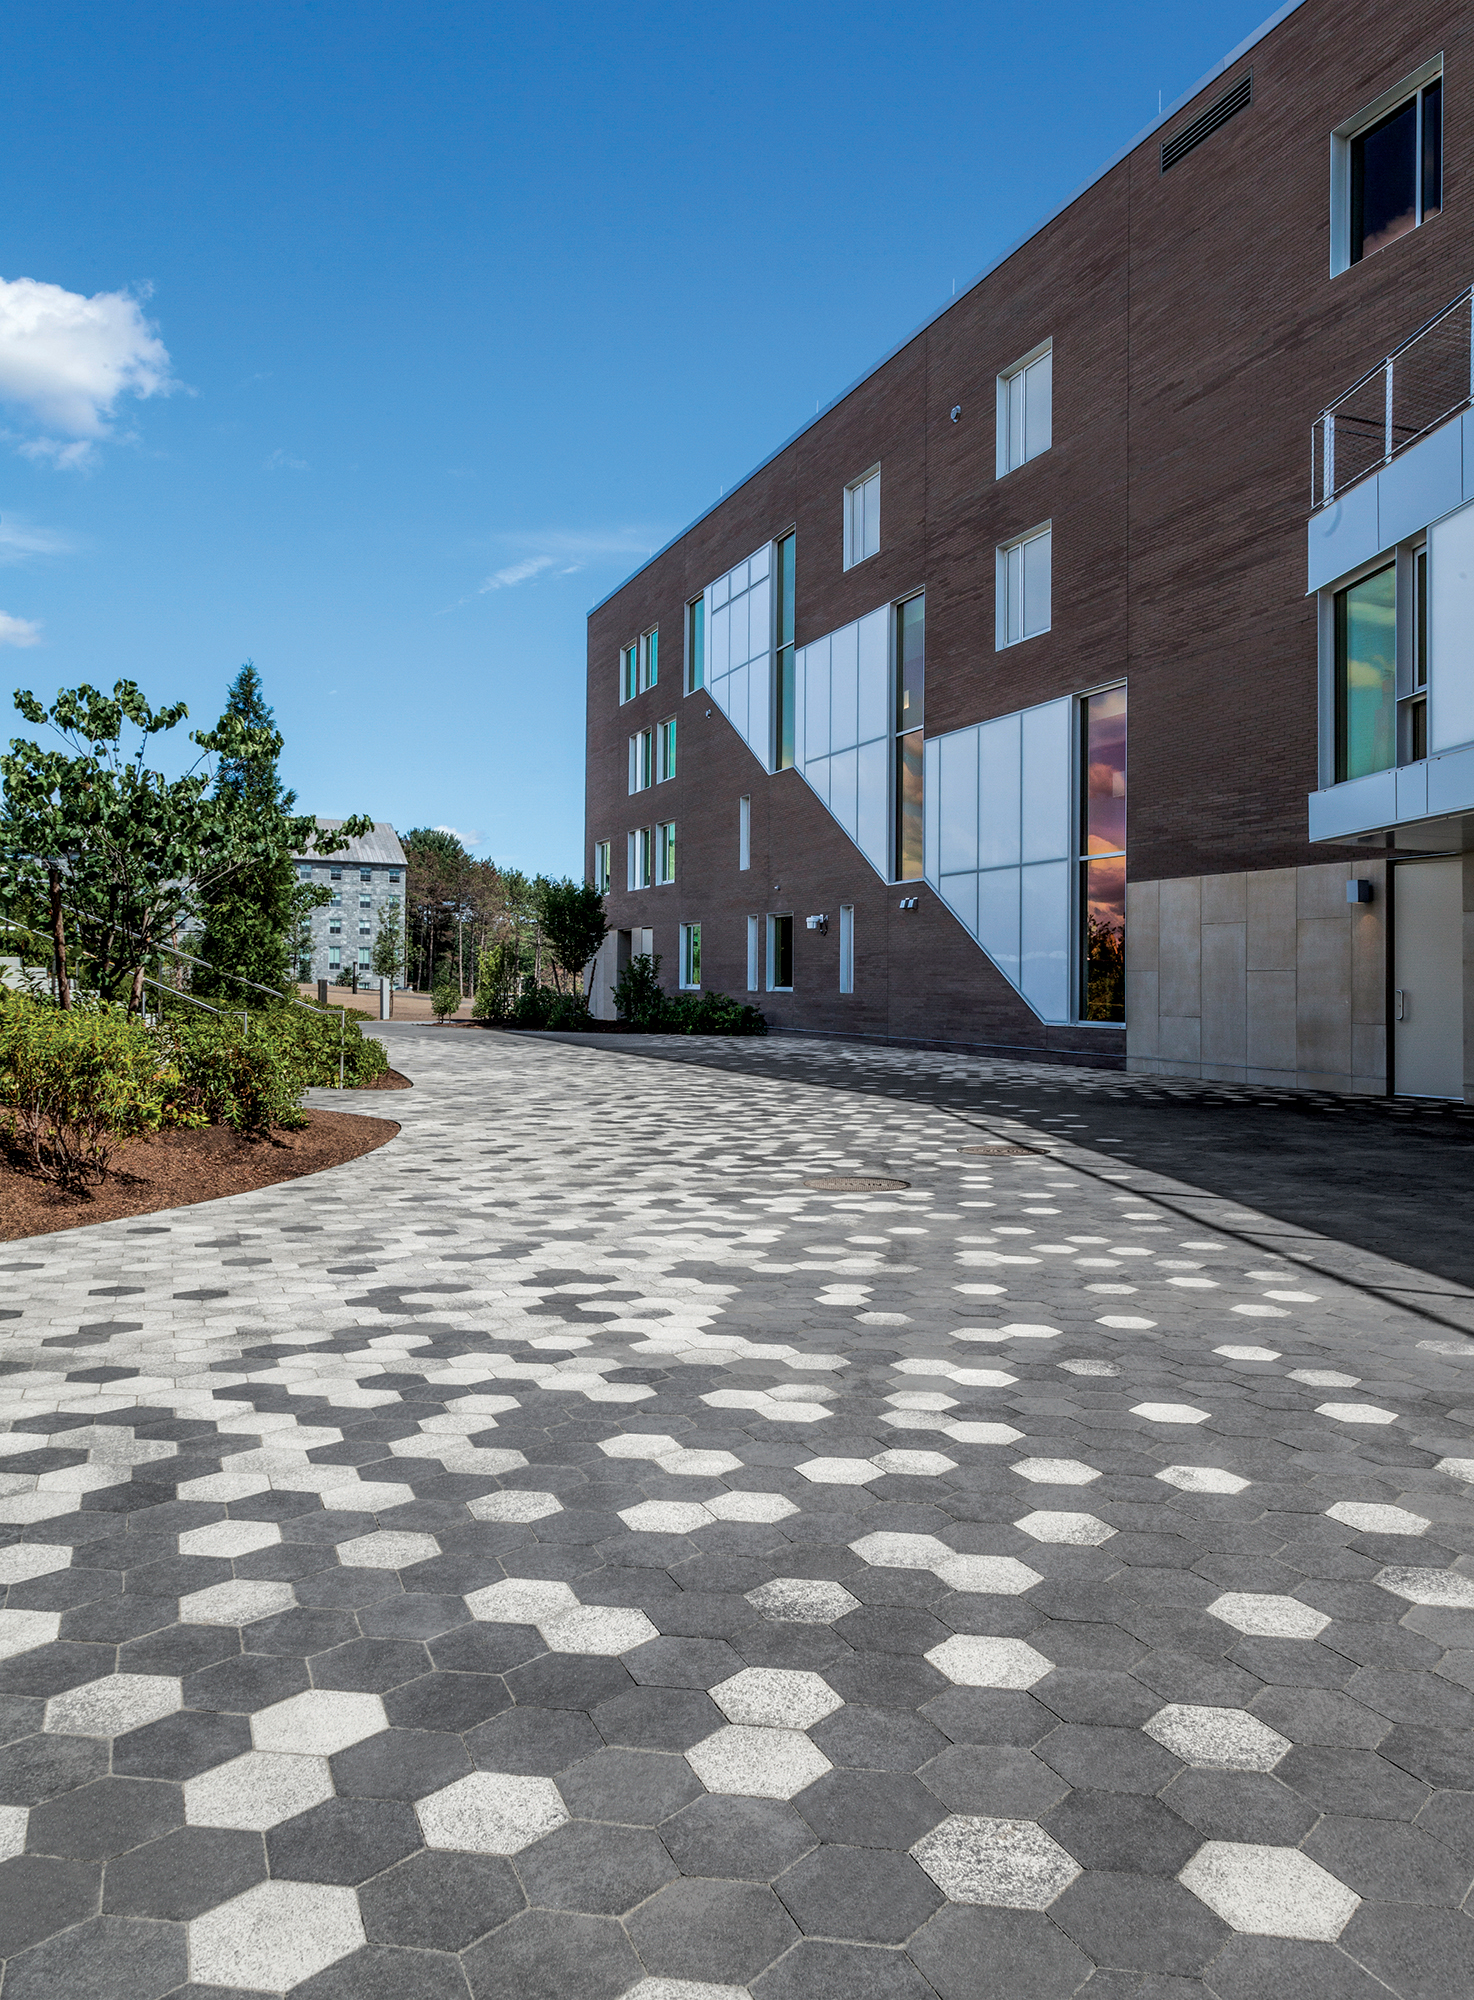 Two-toned hexagon shaped City Park Pavers in a  pixelated pattern, surrounded by shrub bushes adding touches of natural color.